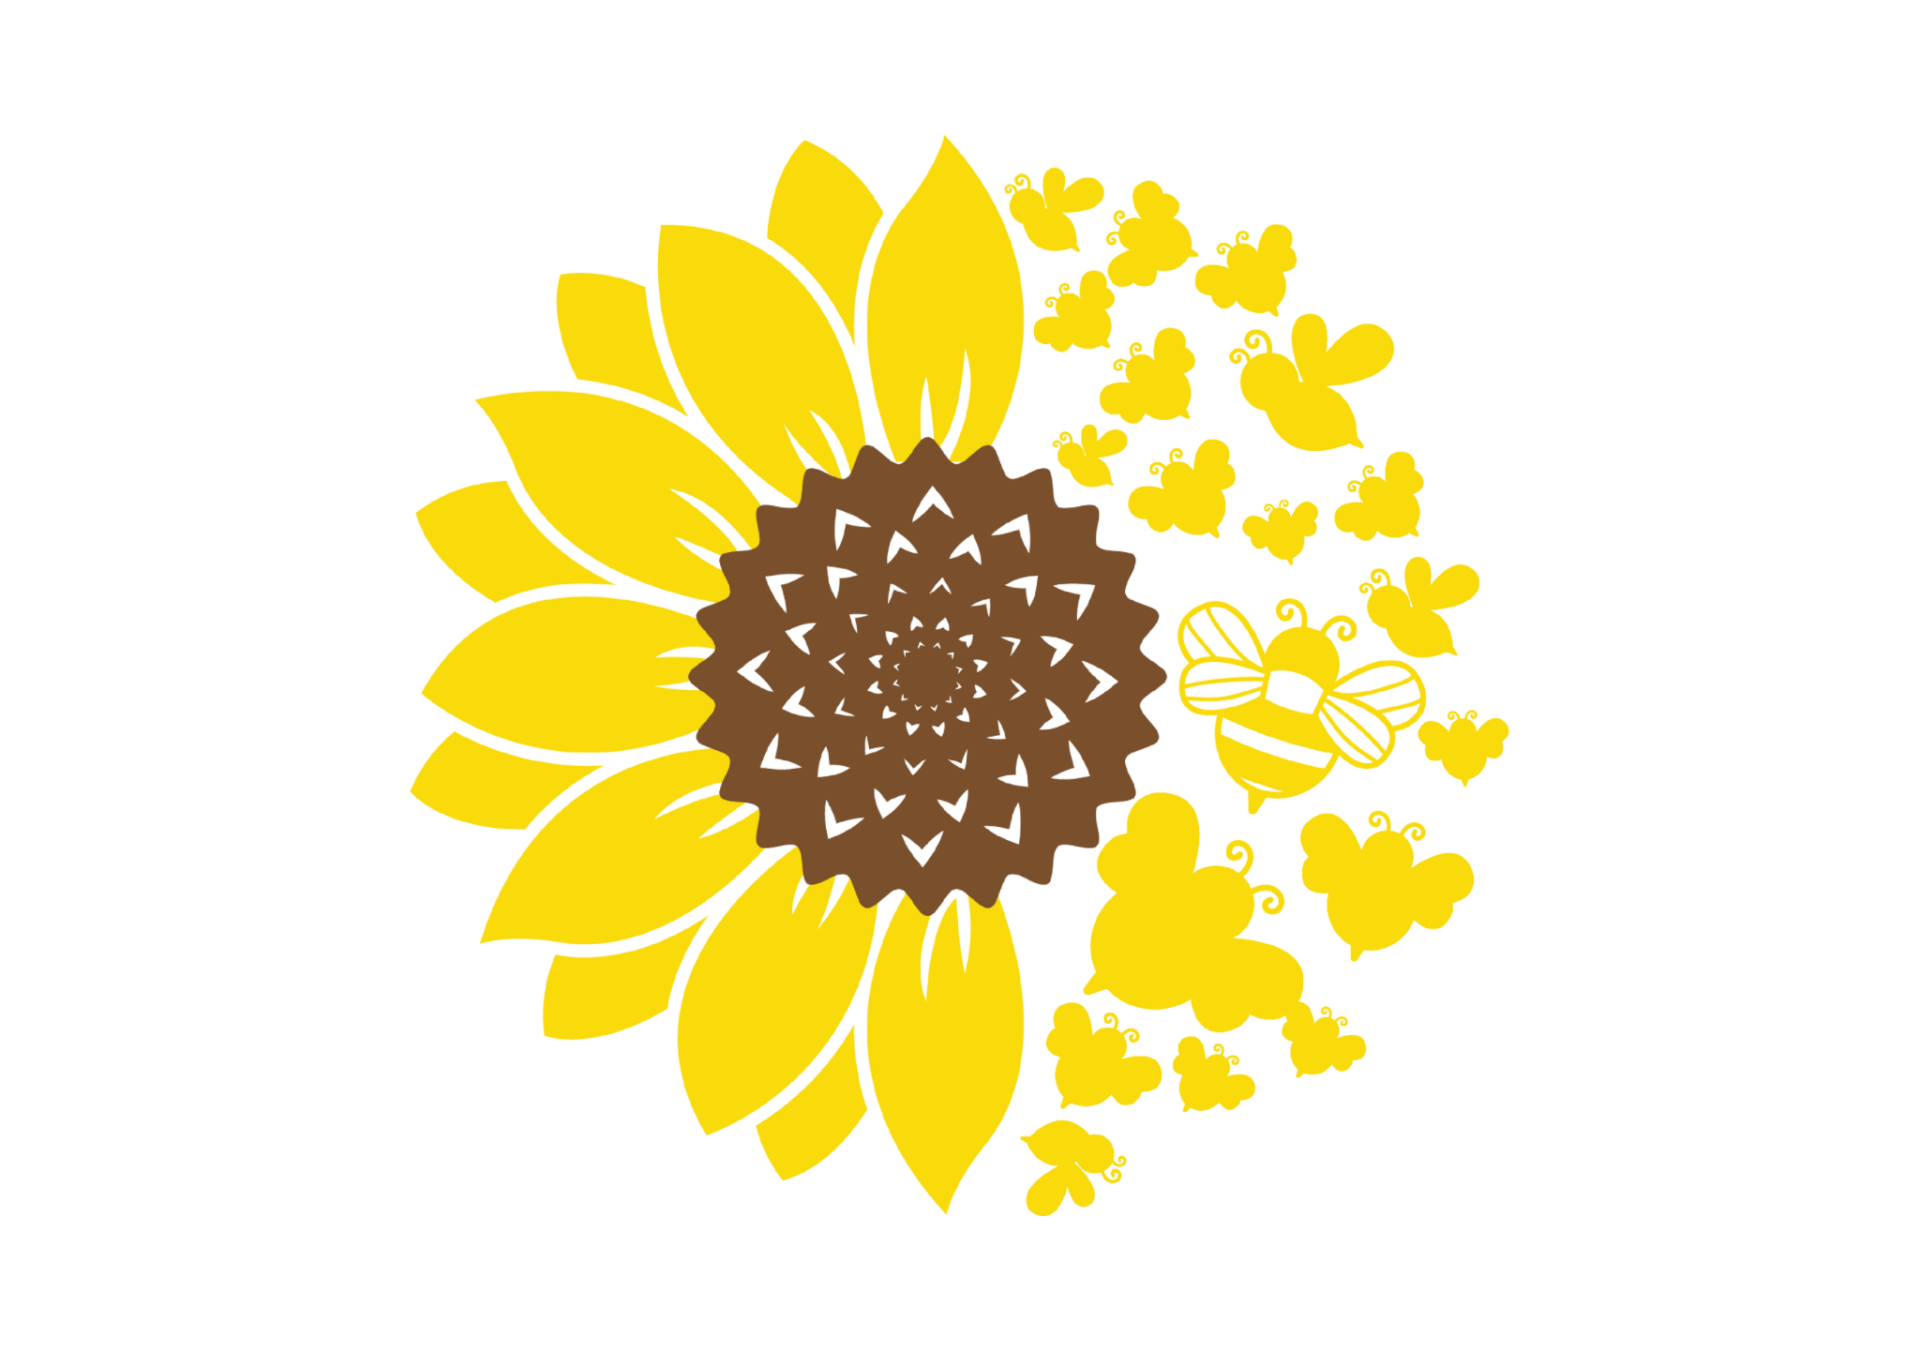 Sunflower graphic with petals falling off and turning into bees flying away